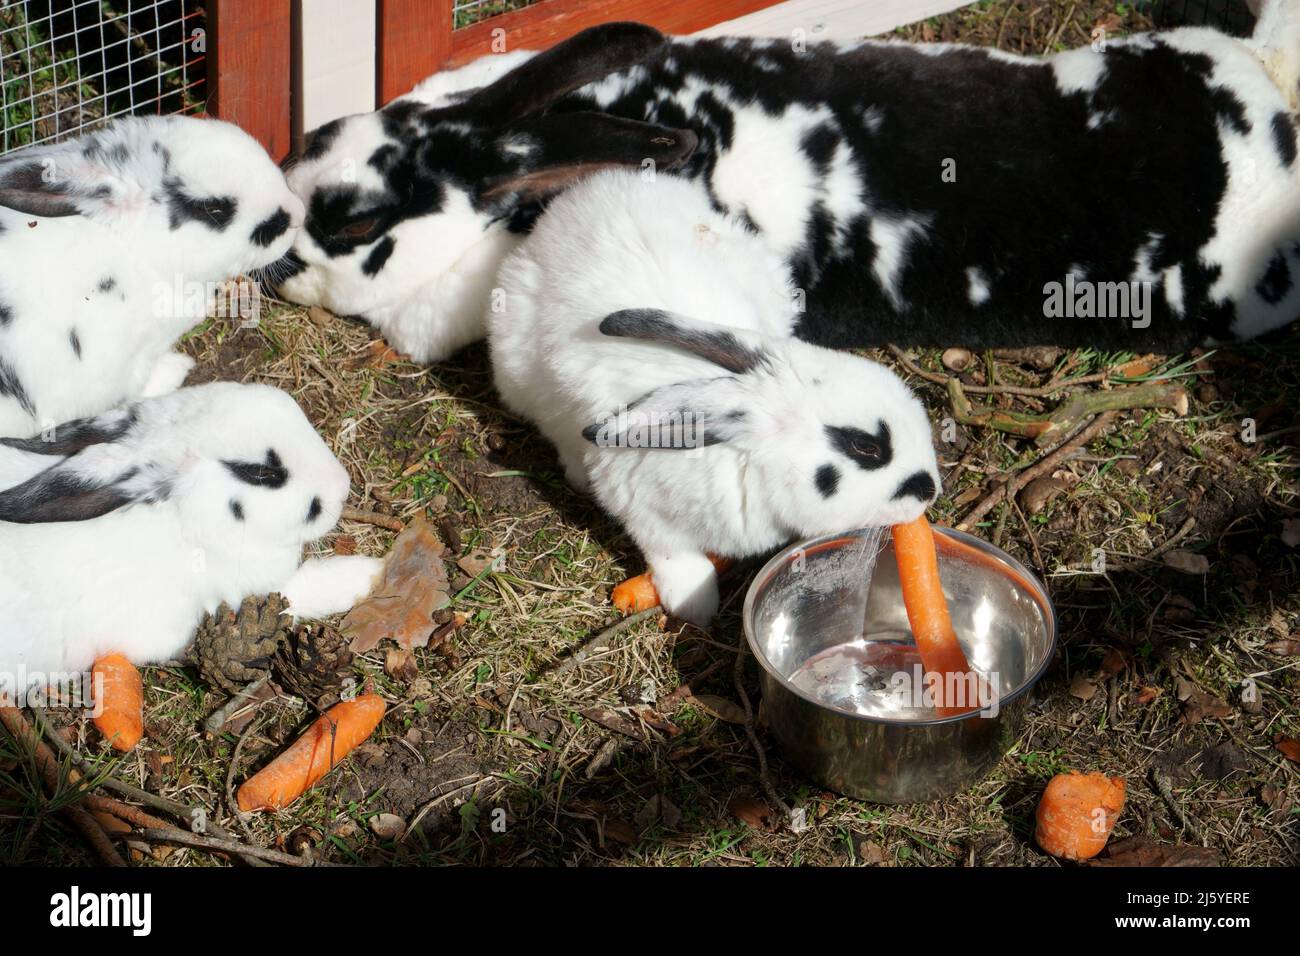 A rabbit eating the carrot. Livestock and animal husbandry. The rabbits in white with black colors gnaws food. Stock Photo